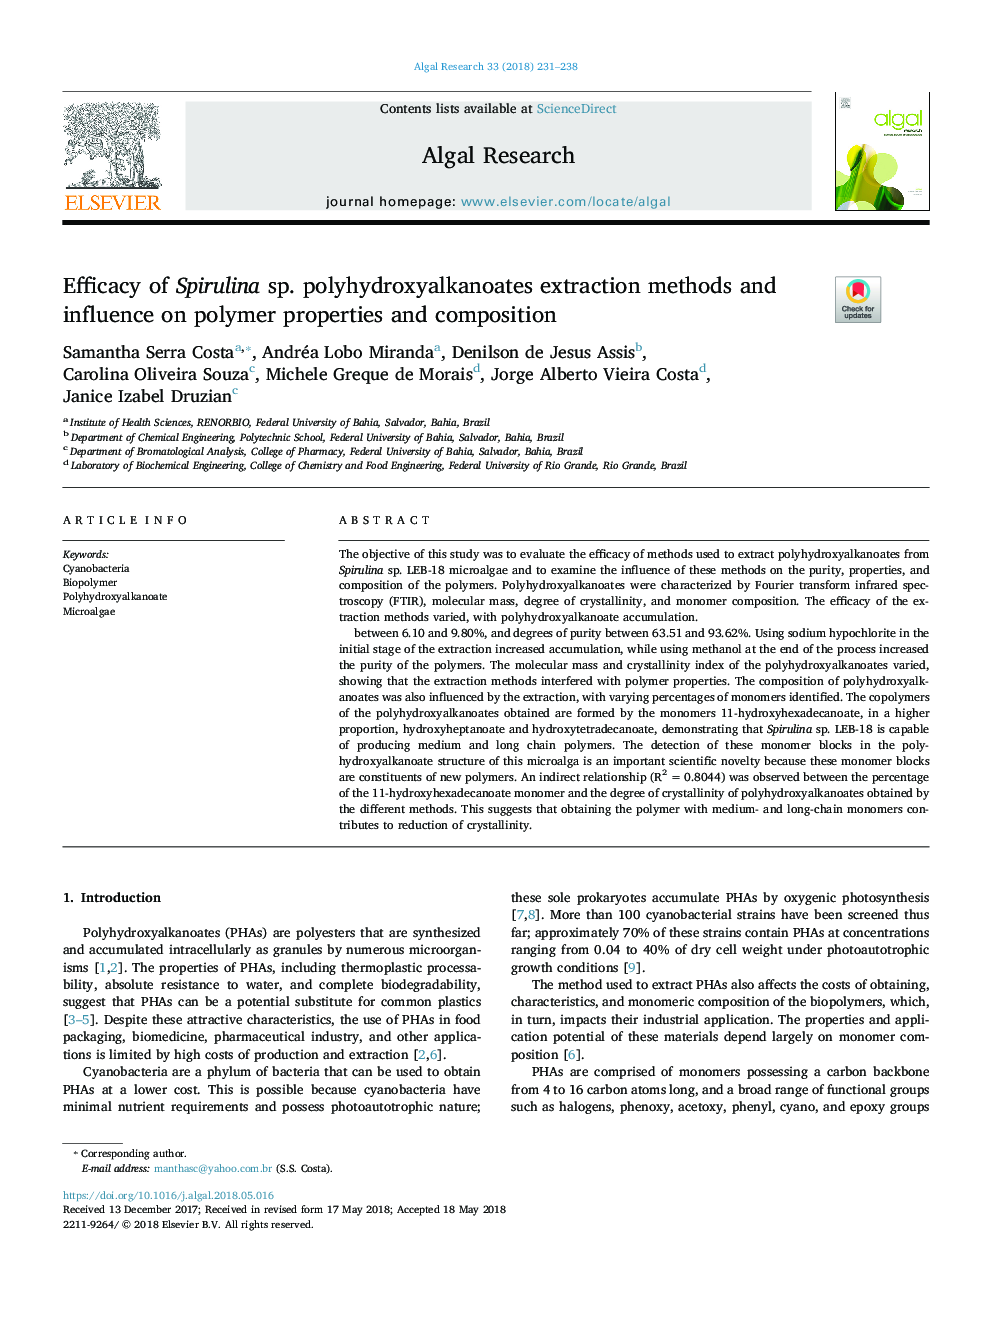 Efficacy of Spirulina sp. polyhydroxyalkanoates extraction methods and influence on polymer properties and composition